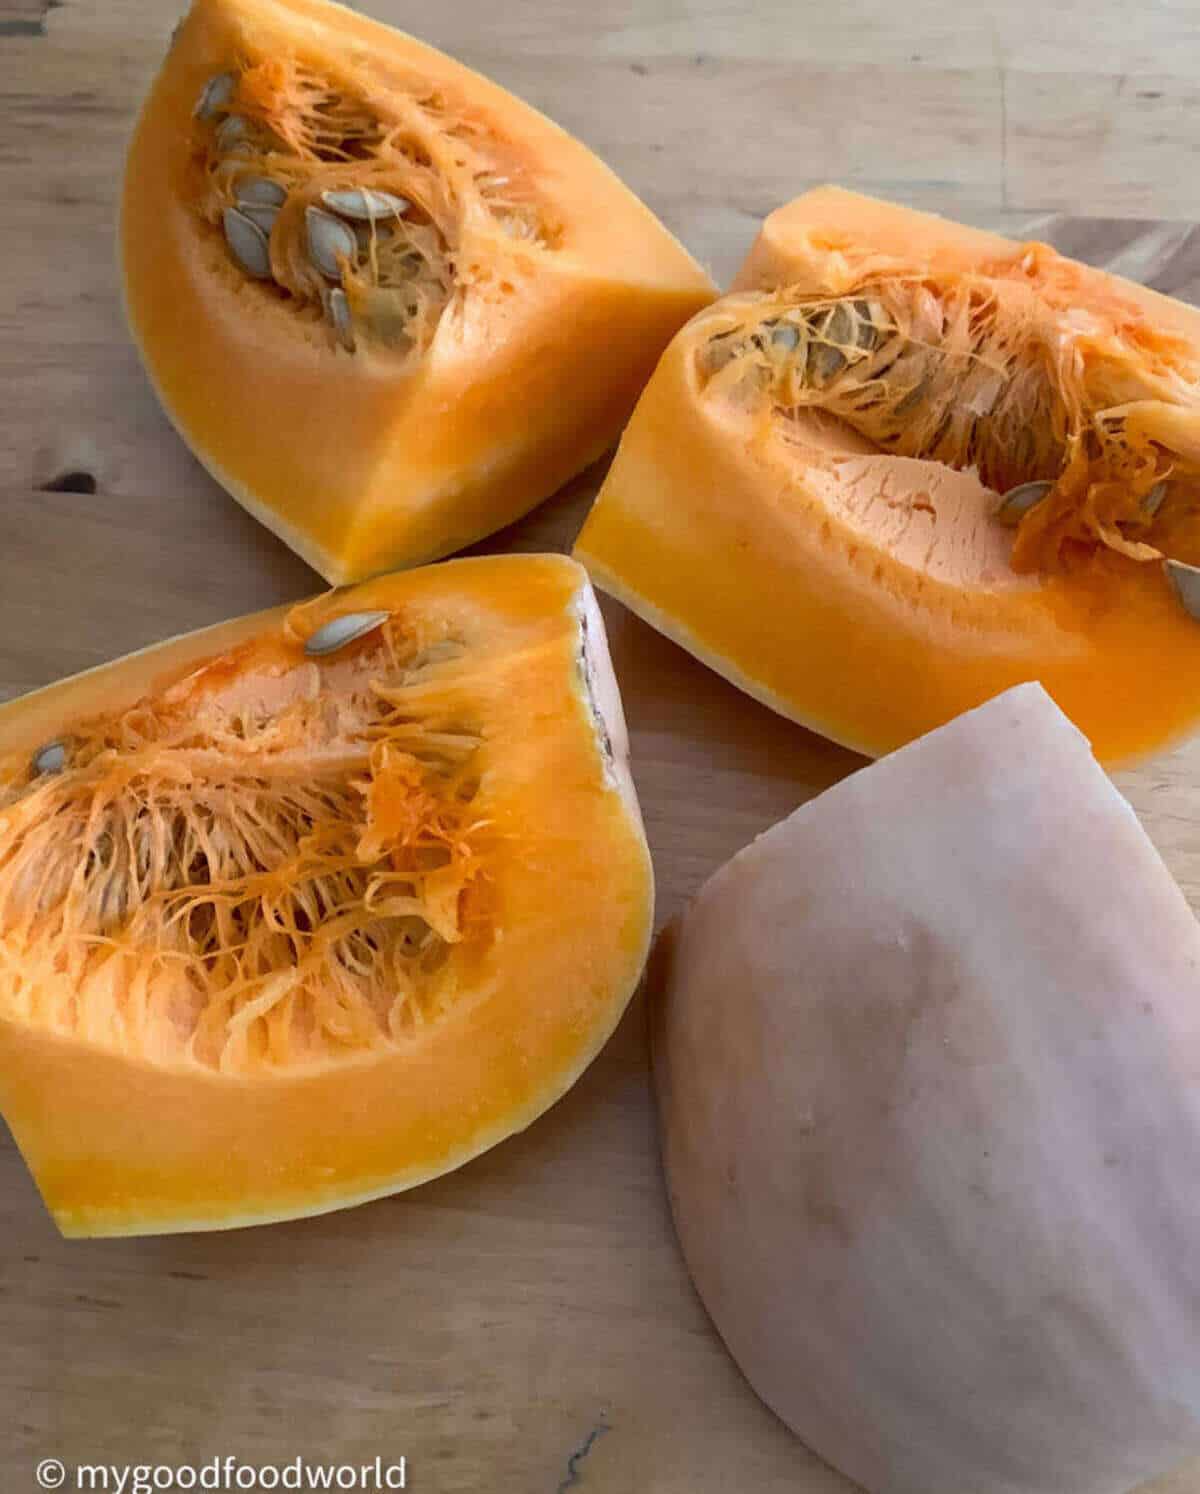 Four chunky pieces of butternut squash placed on a table.